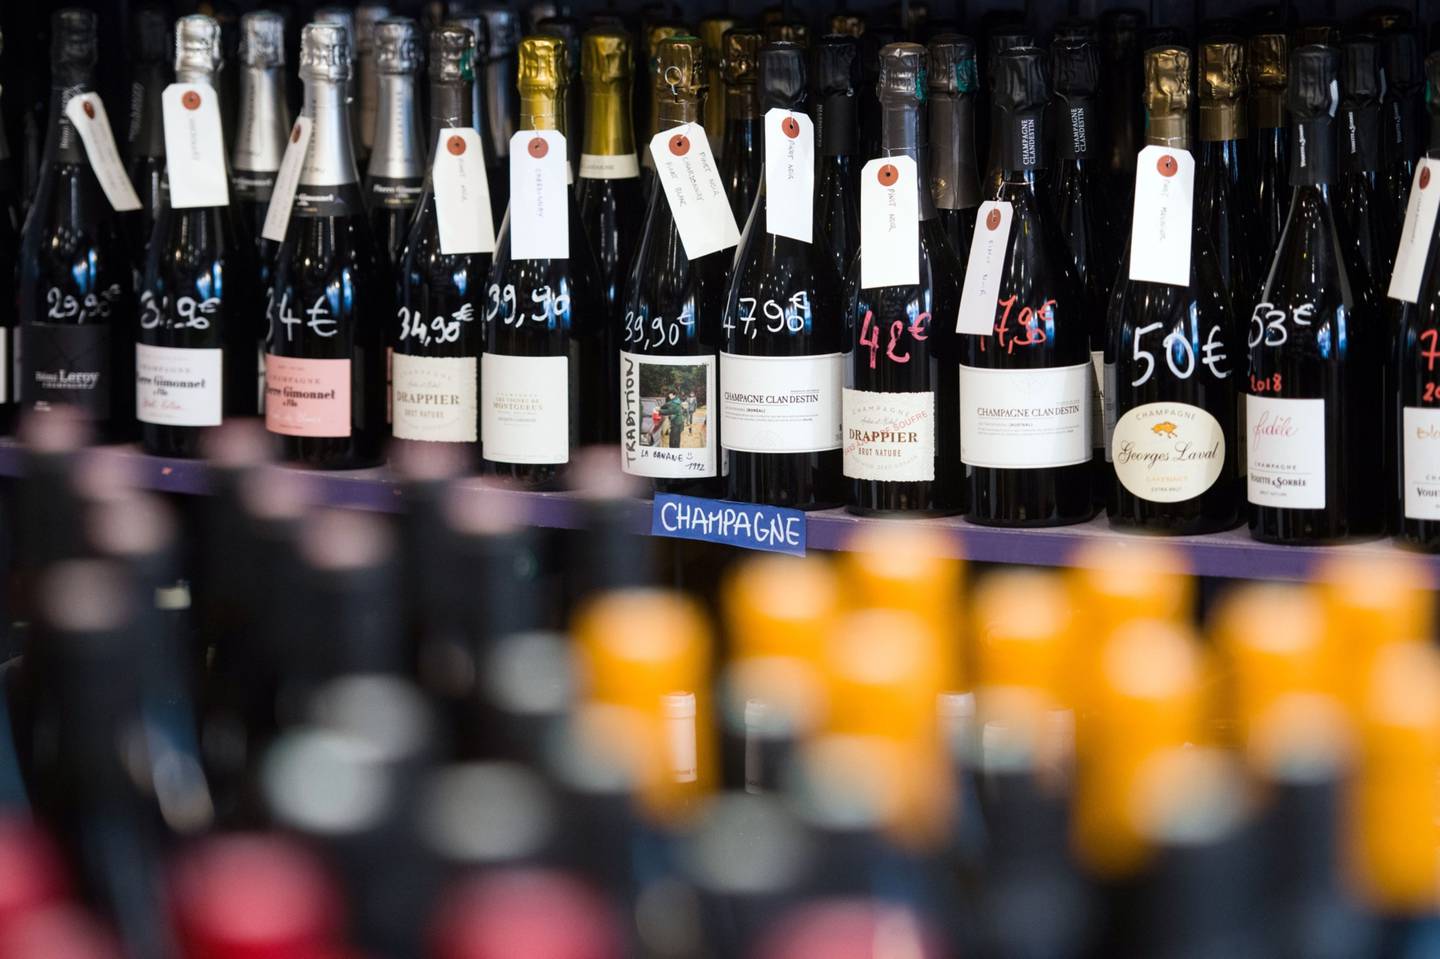 Bottles of champagne for sale at the La Cave Le Verre Vole wine store in Paris, France, on Thursday, Jan. 20, 2022. After plunging in 2020, sales of champagne jumped last year to a record 5.5 billion euros ($6.24 billion), according to the Comite Champagne (CIVC). Photographer: Nathan Laine/Bloomberg